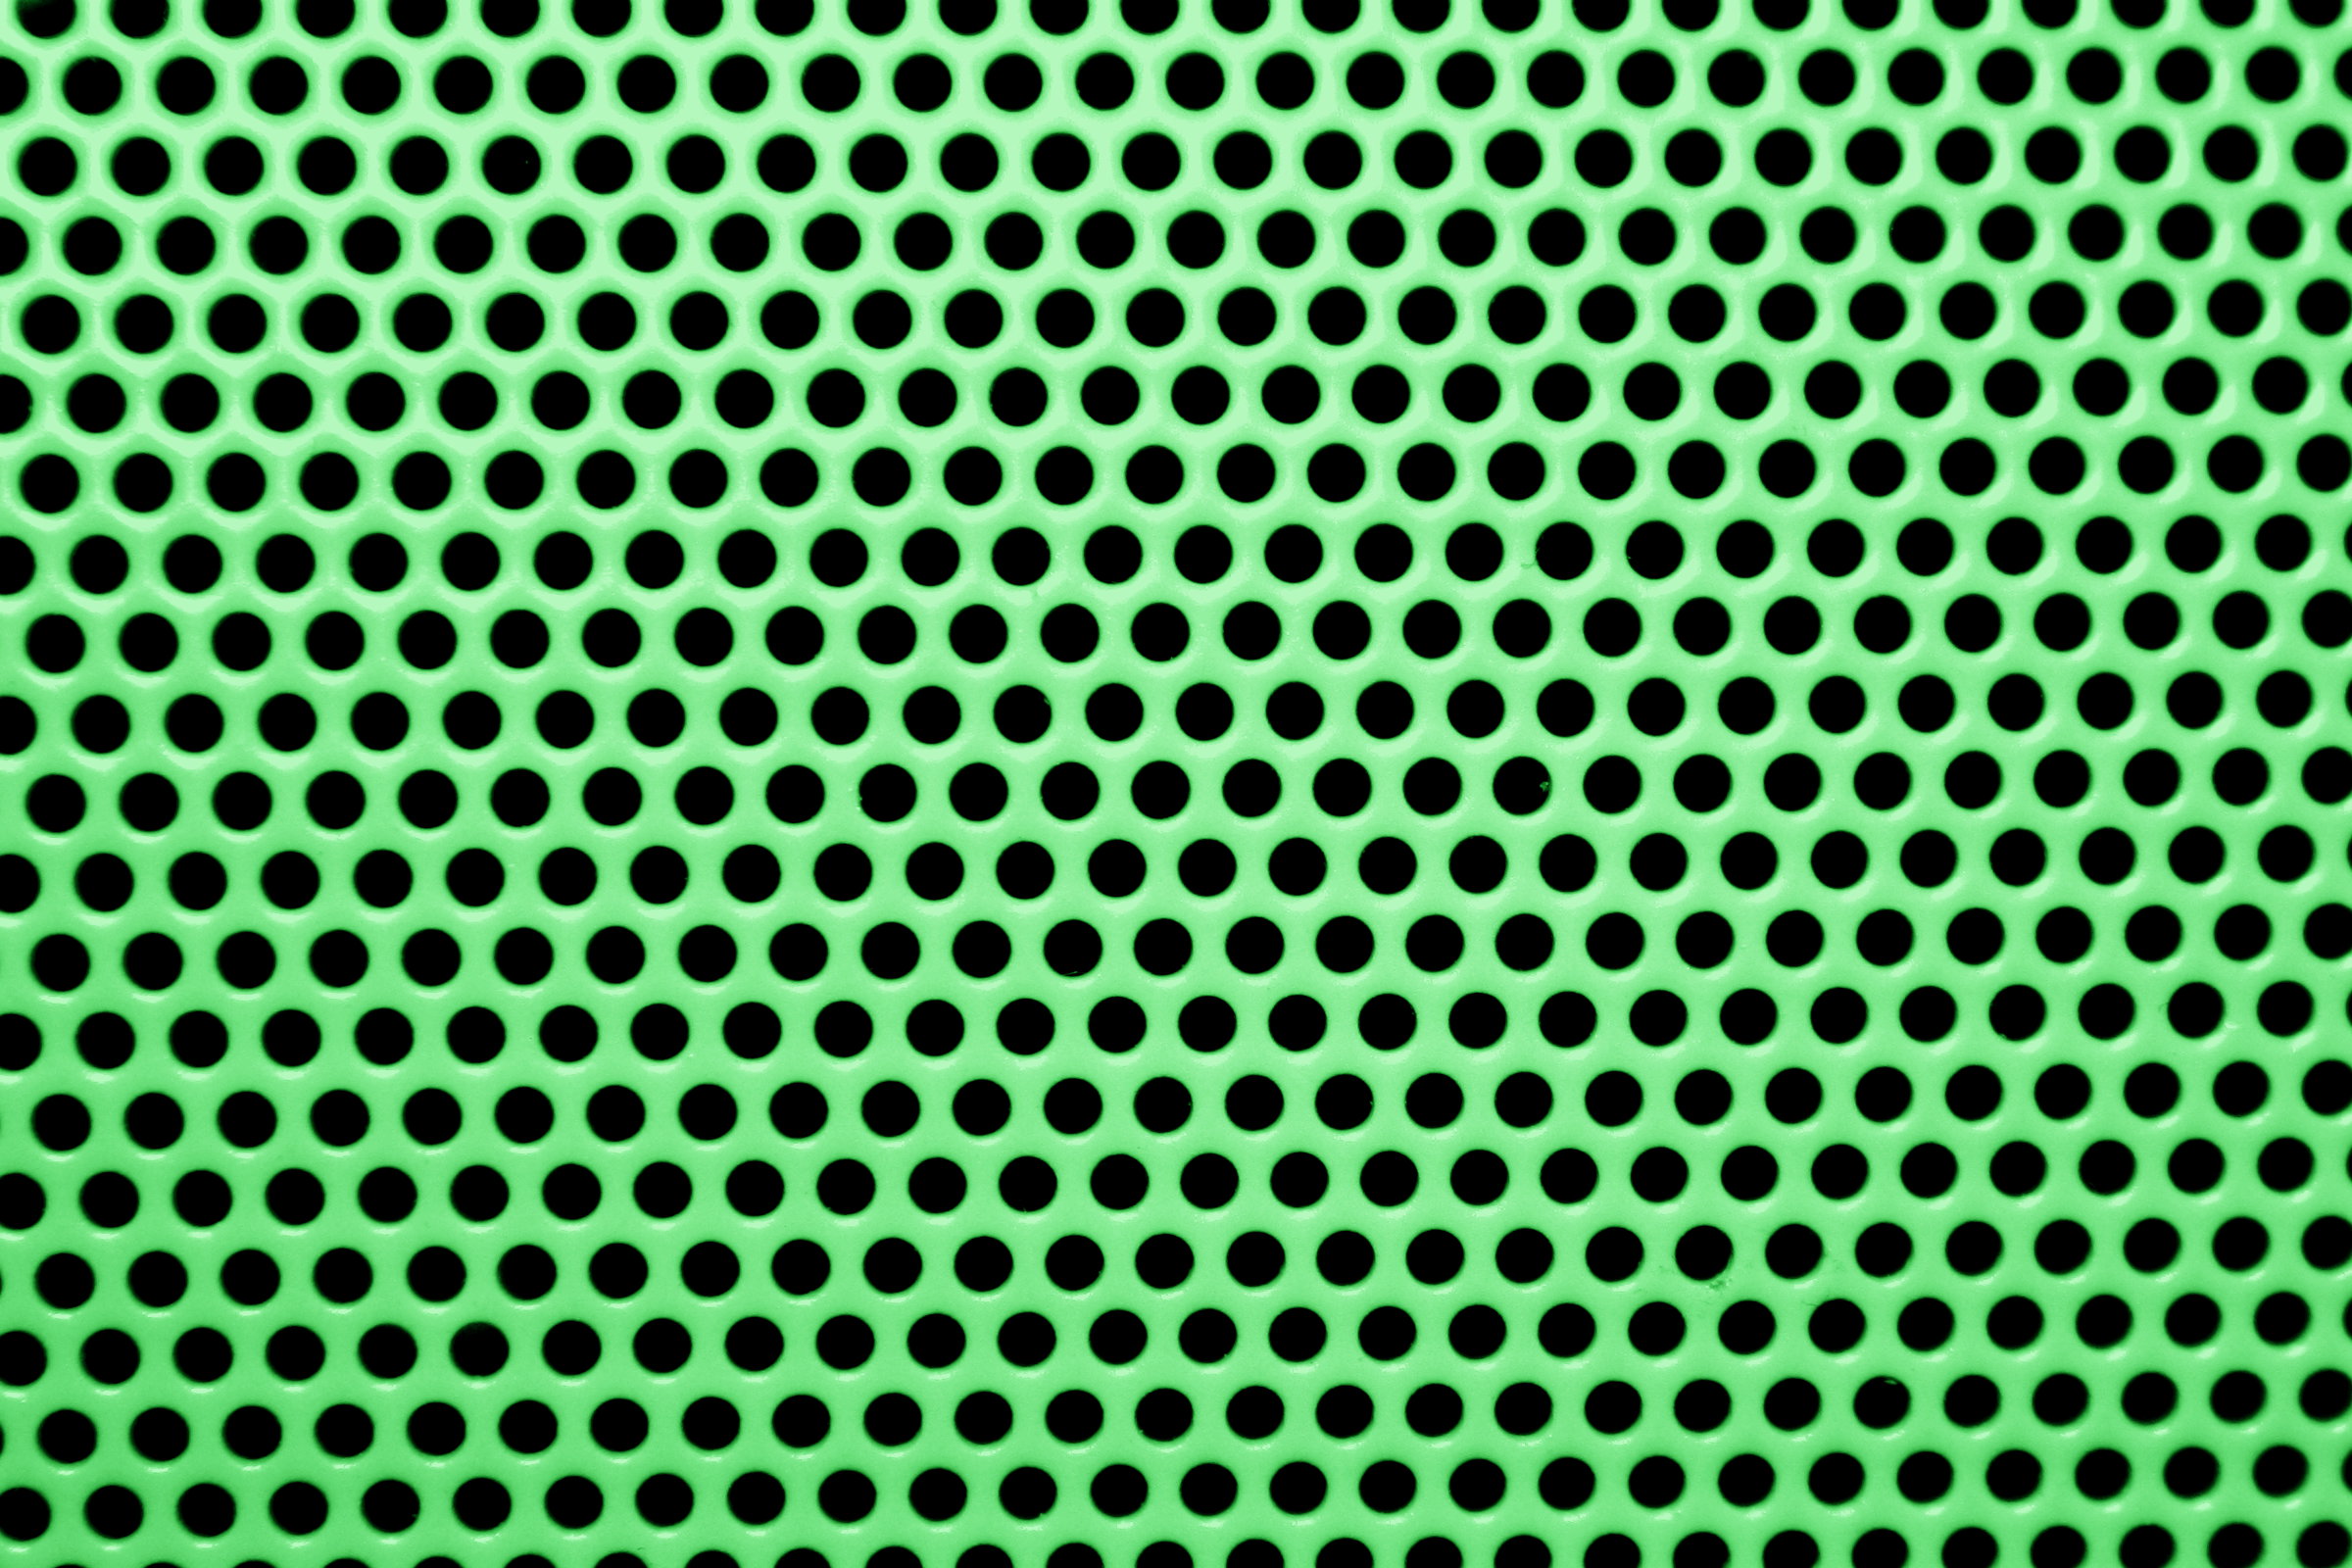 Green Mesh with Round Holes Texture Picture | Free Photograph ...